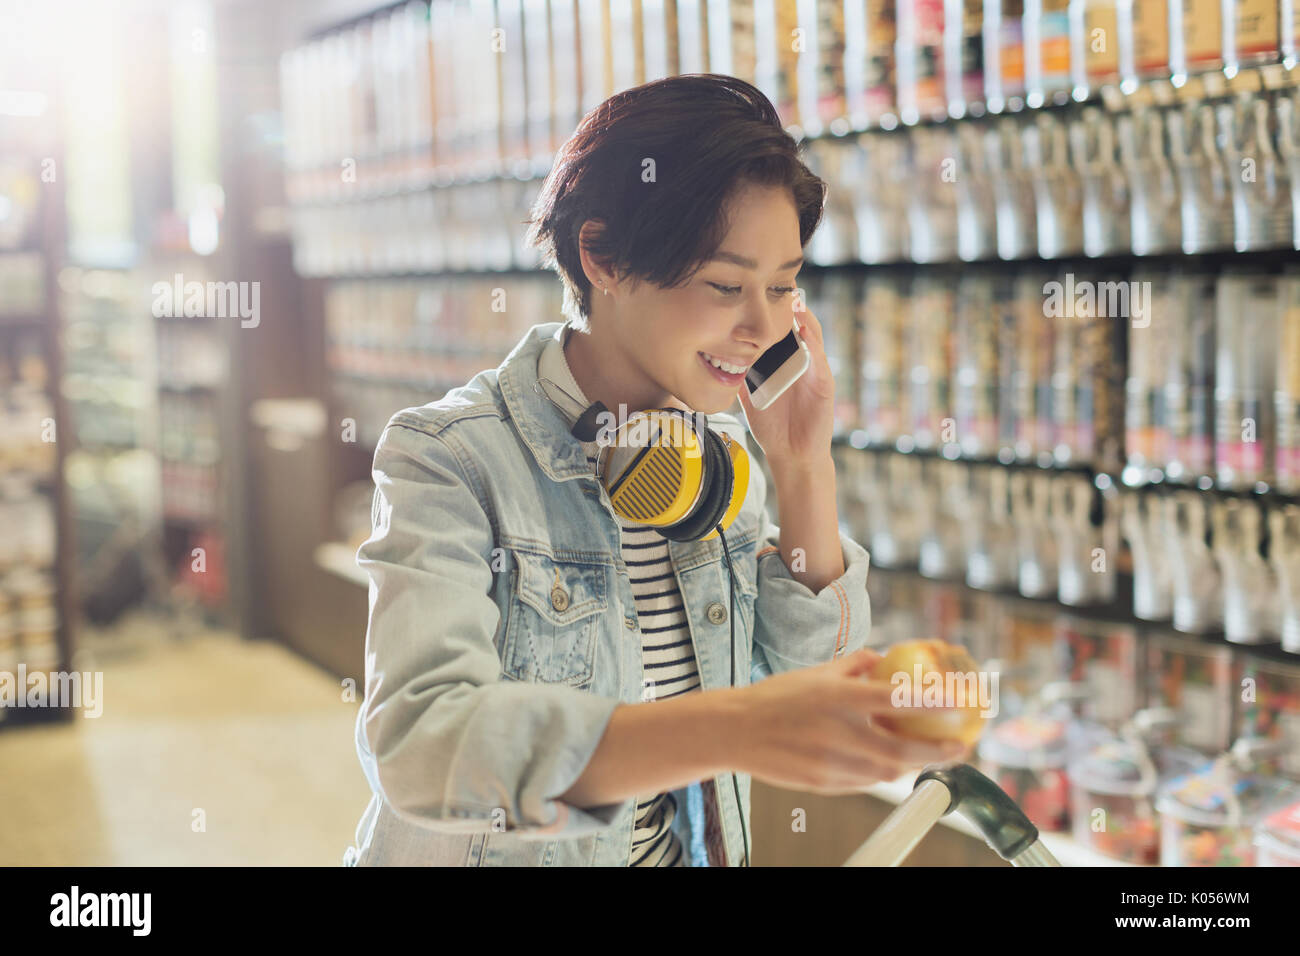 Smiling young woman with headphones talking on cell phone grocery shopping in market Stock Photo